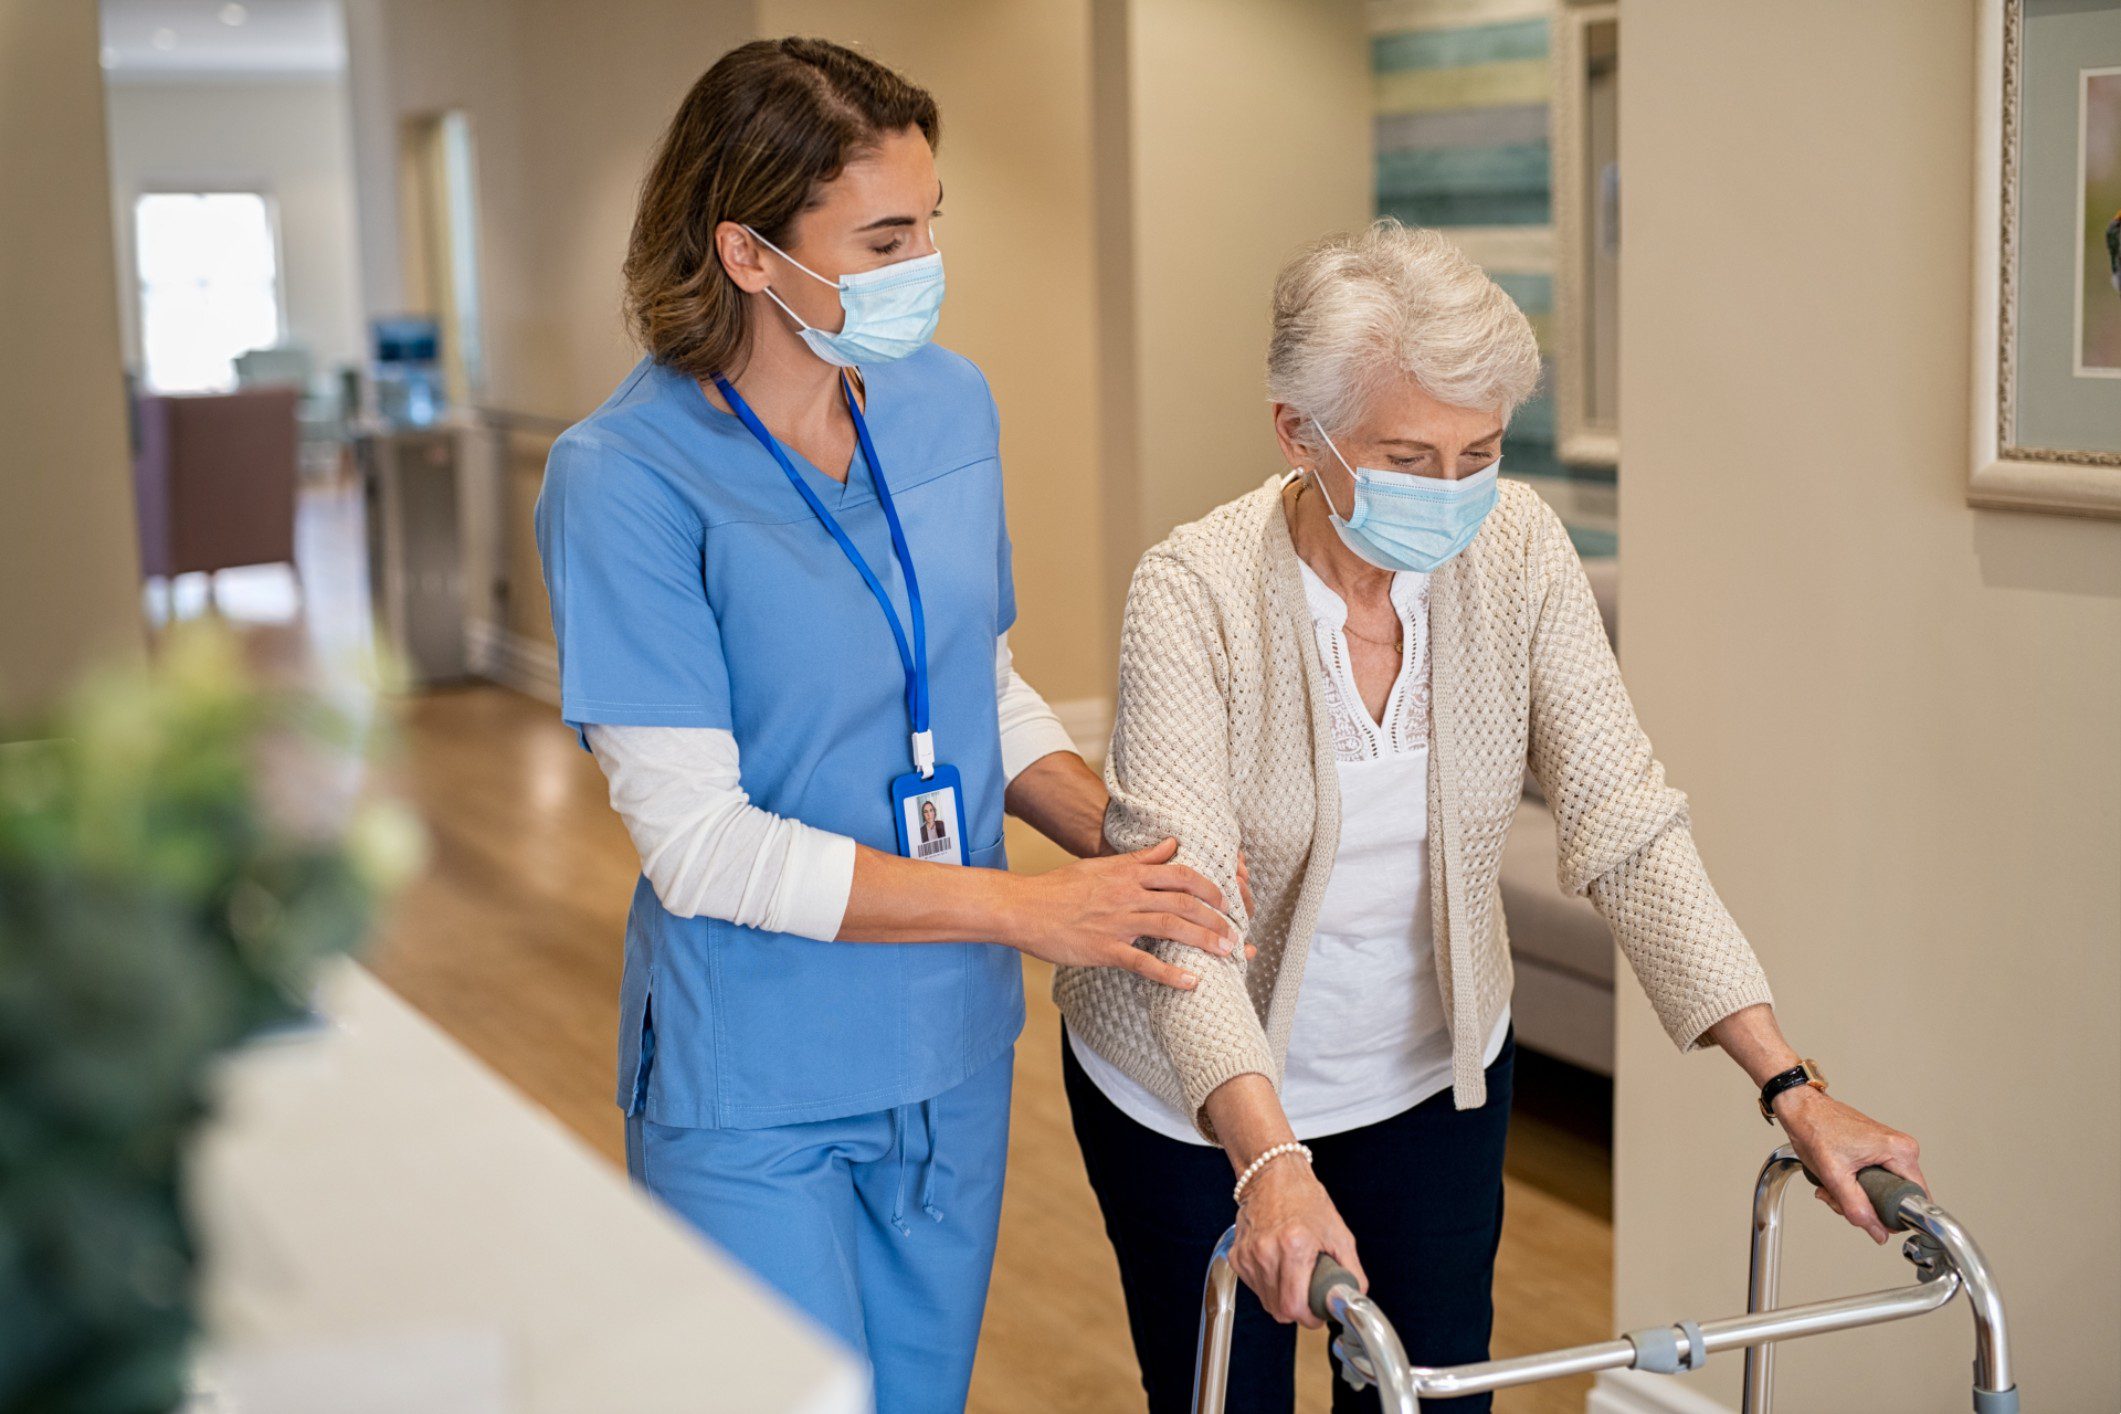 4 in 10 nursing homes have a COVID outbreak and the death rate is high. What’s going wrong?